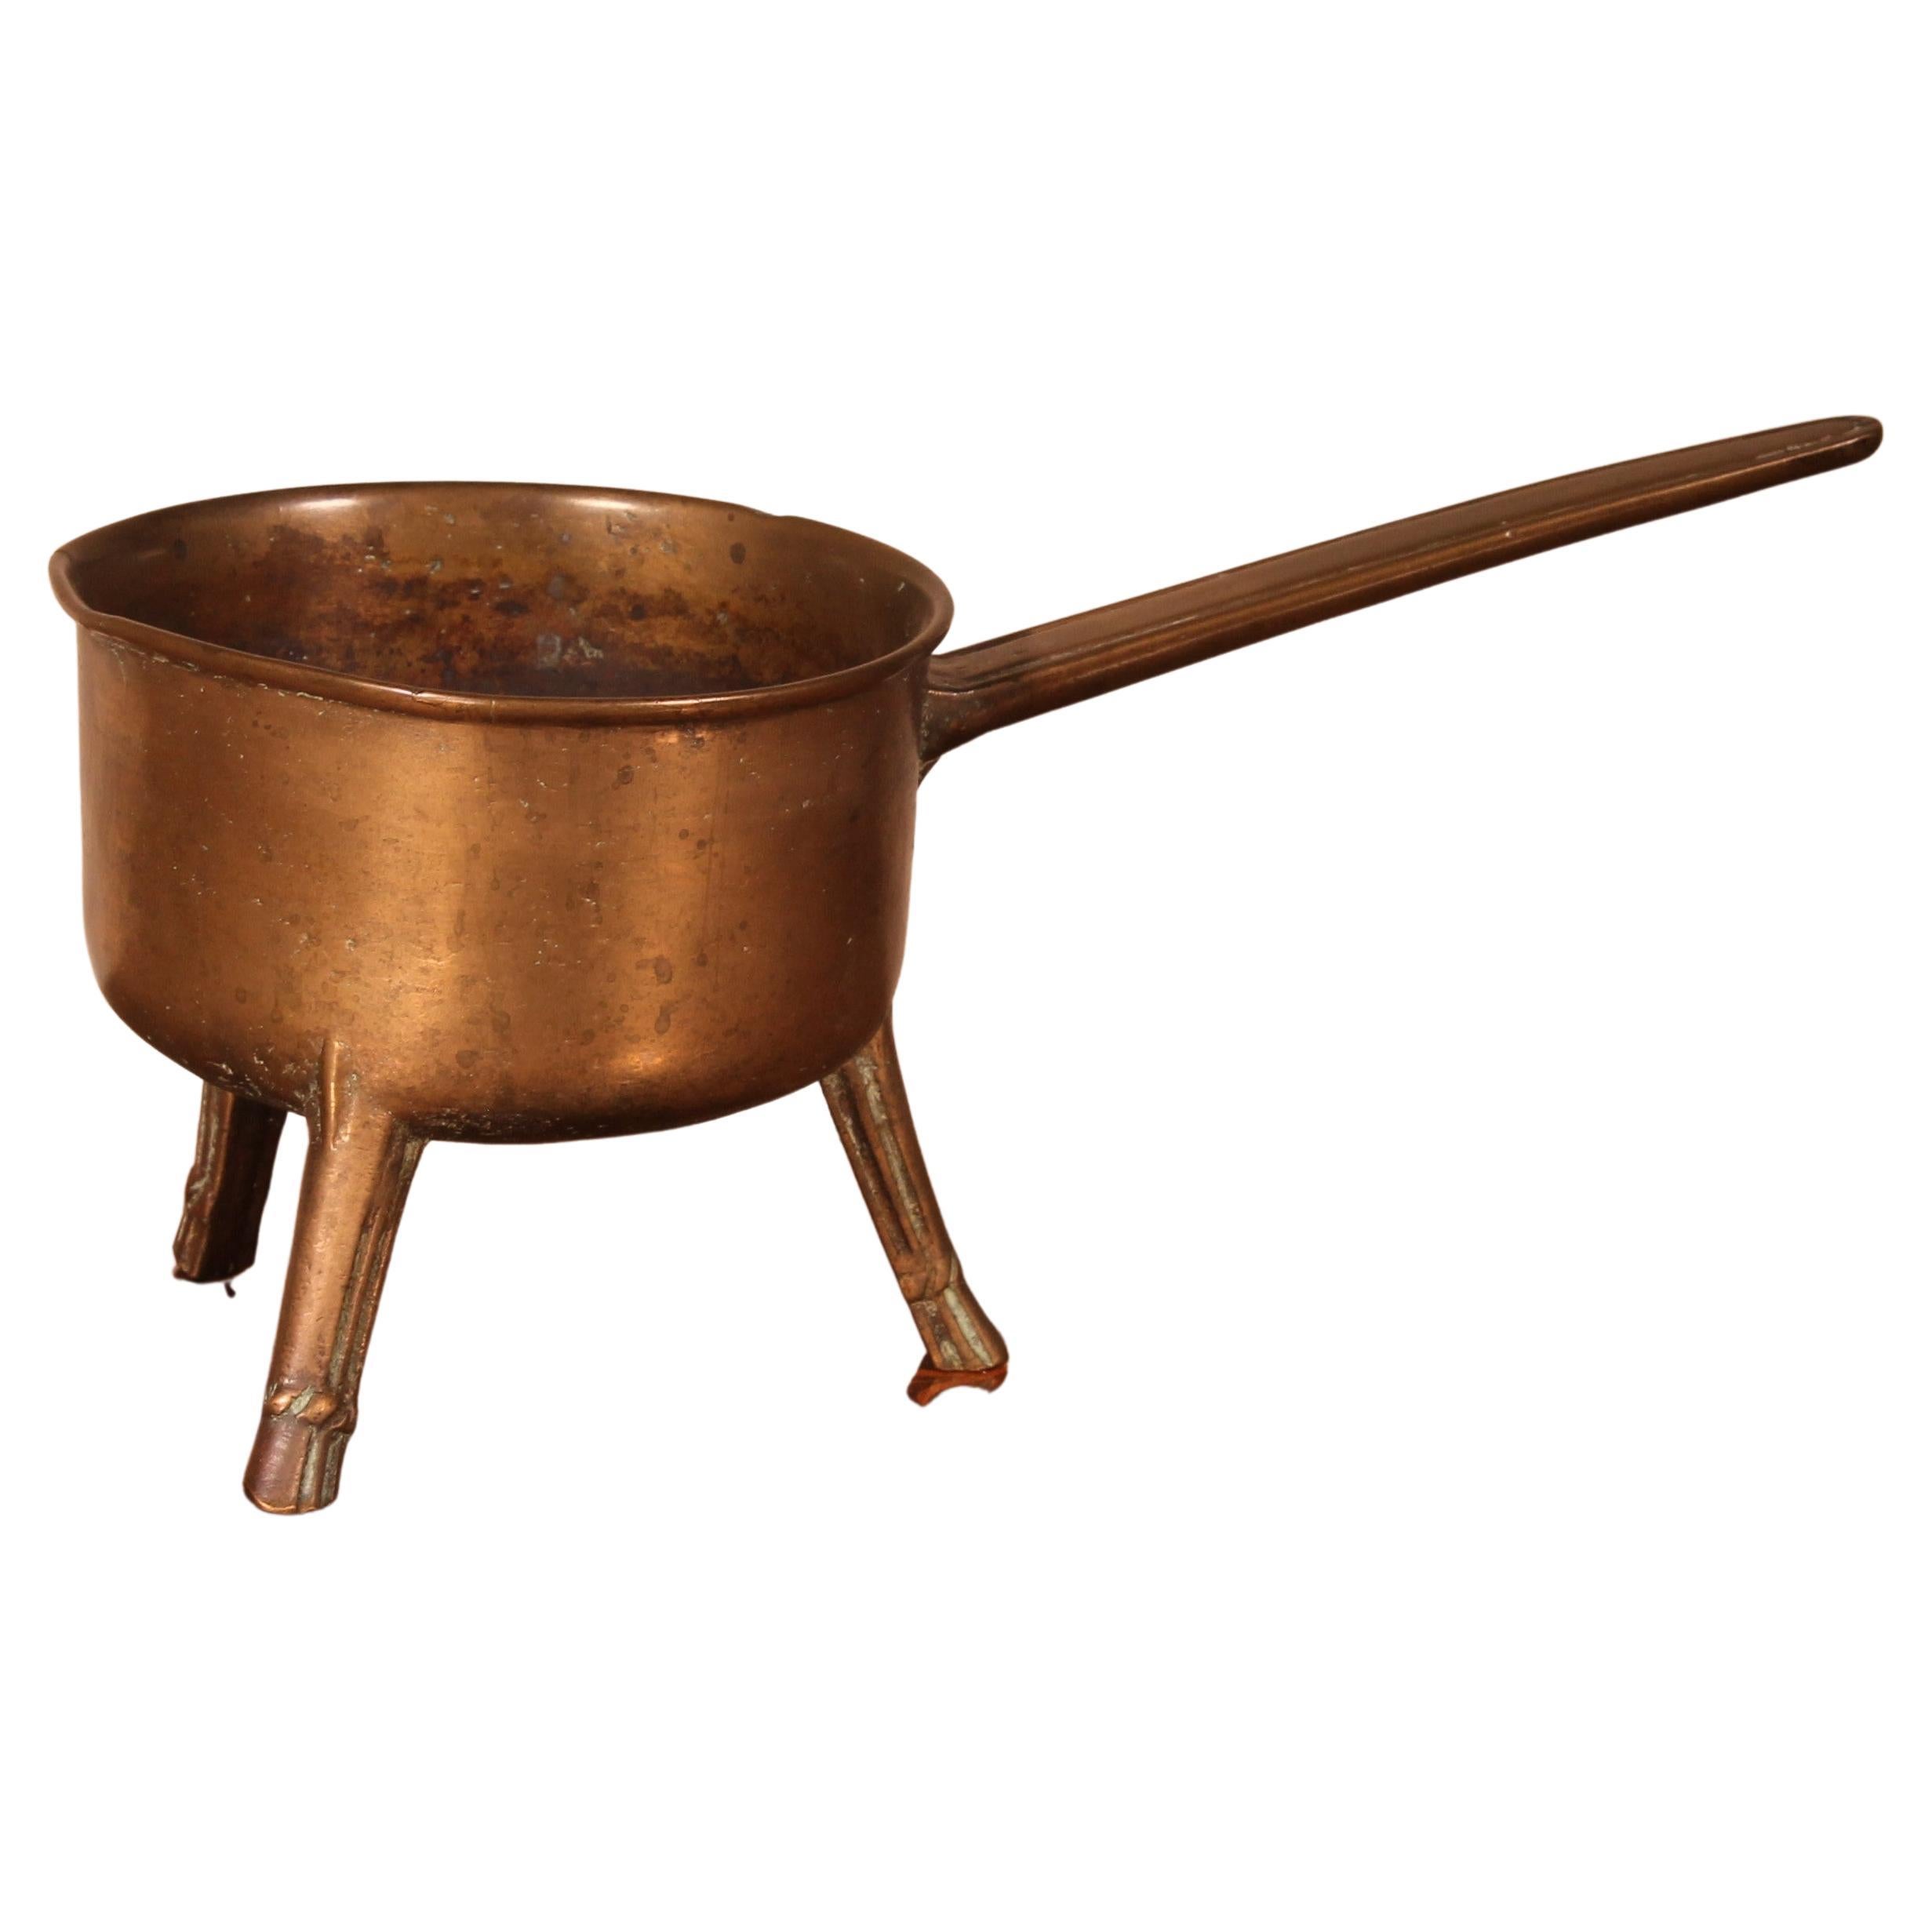 Tripod Apothecary Skillet Late 17th-Early 18th Century, England For Sale